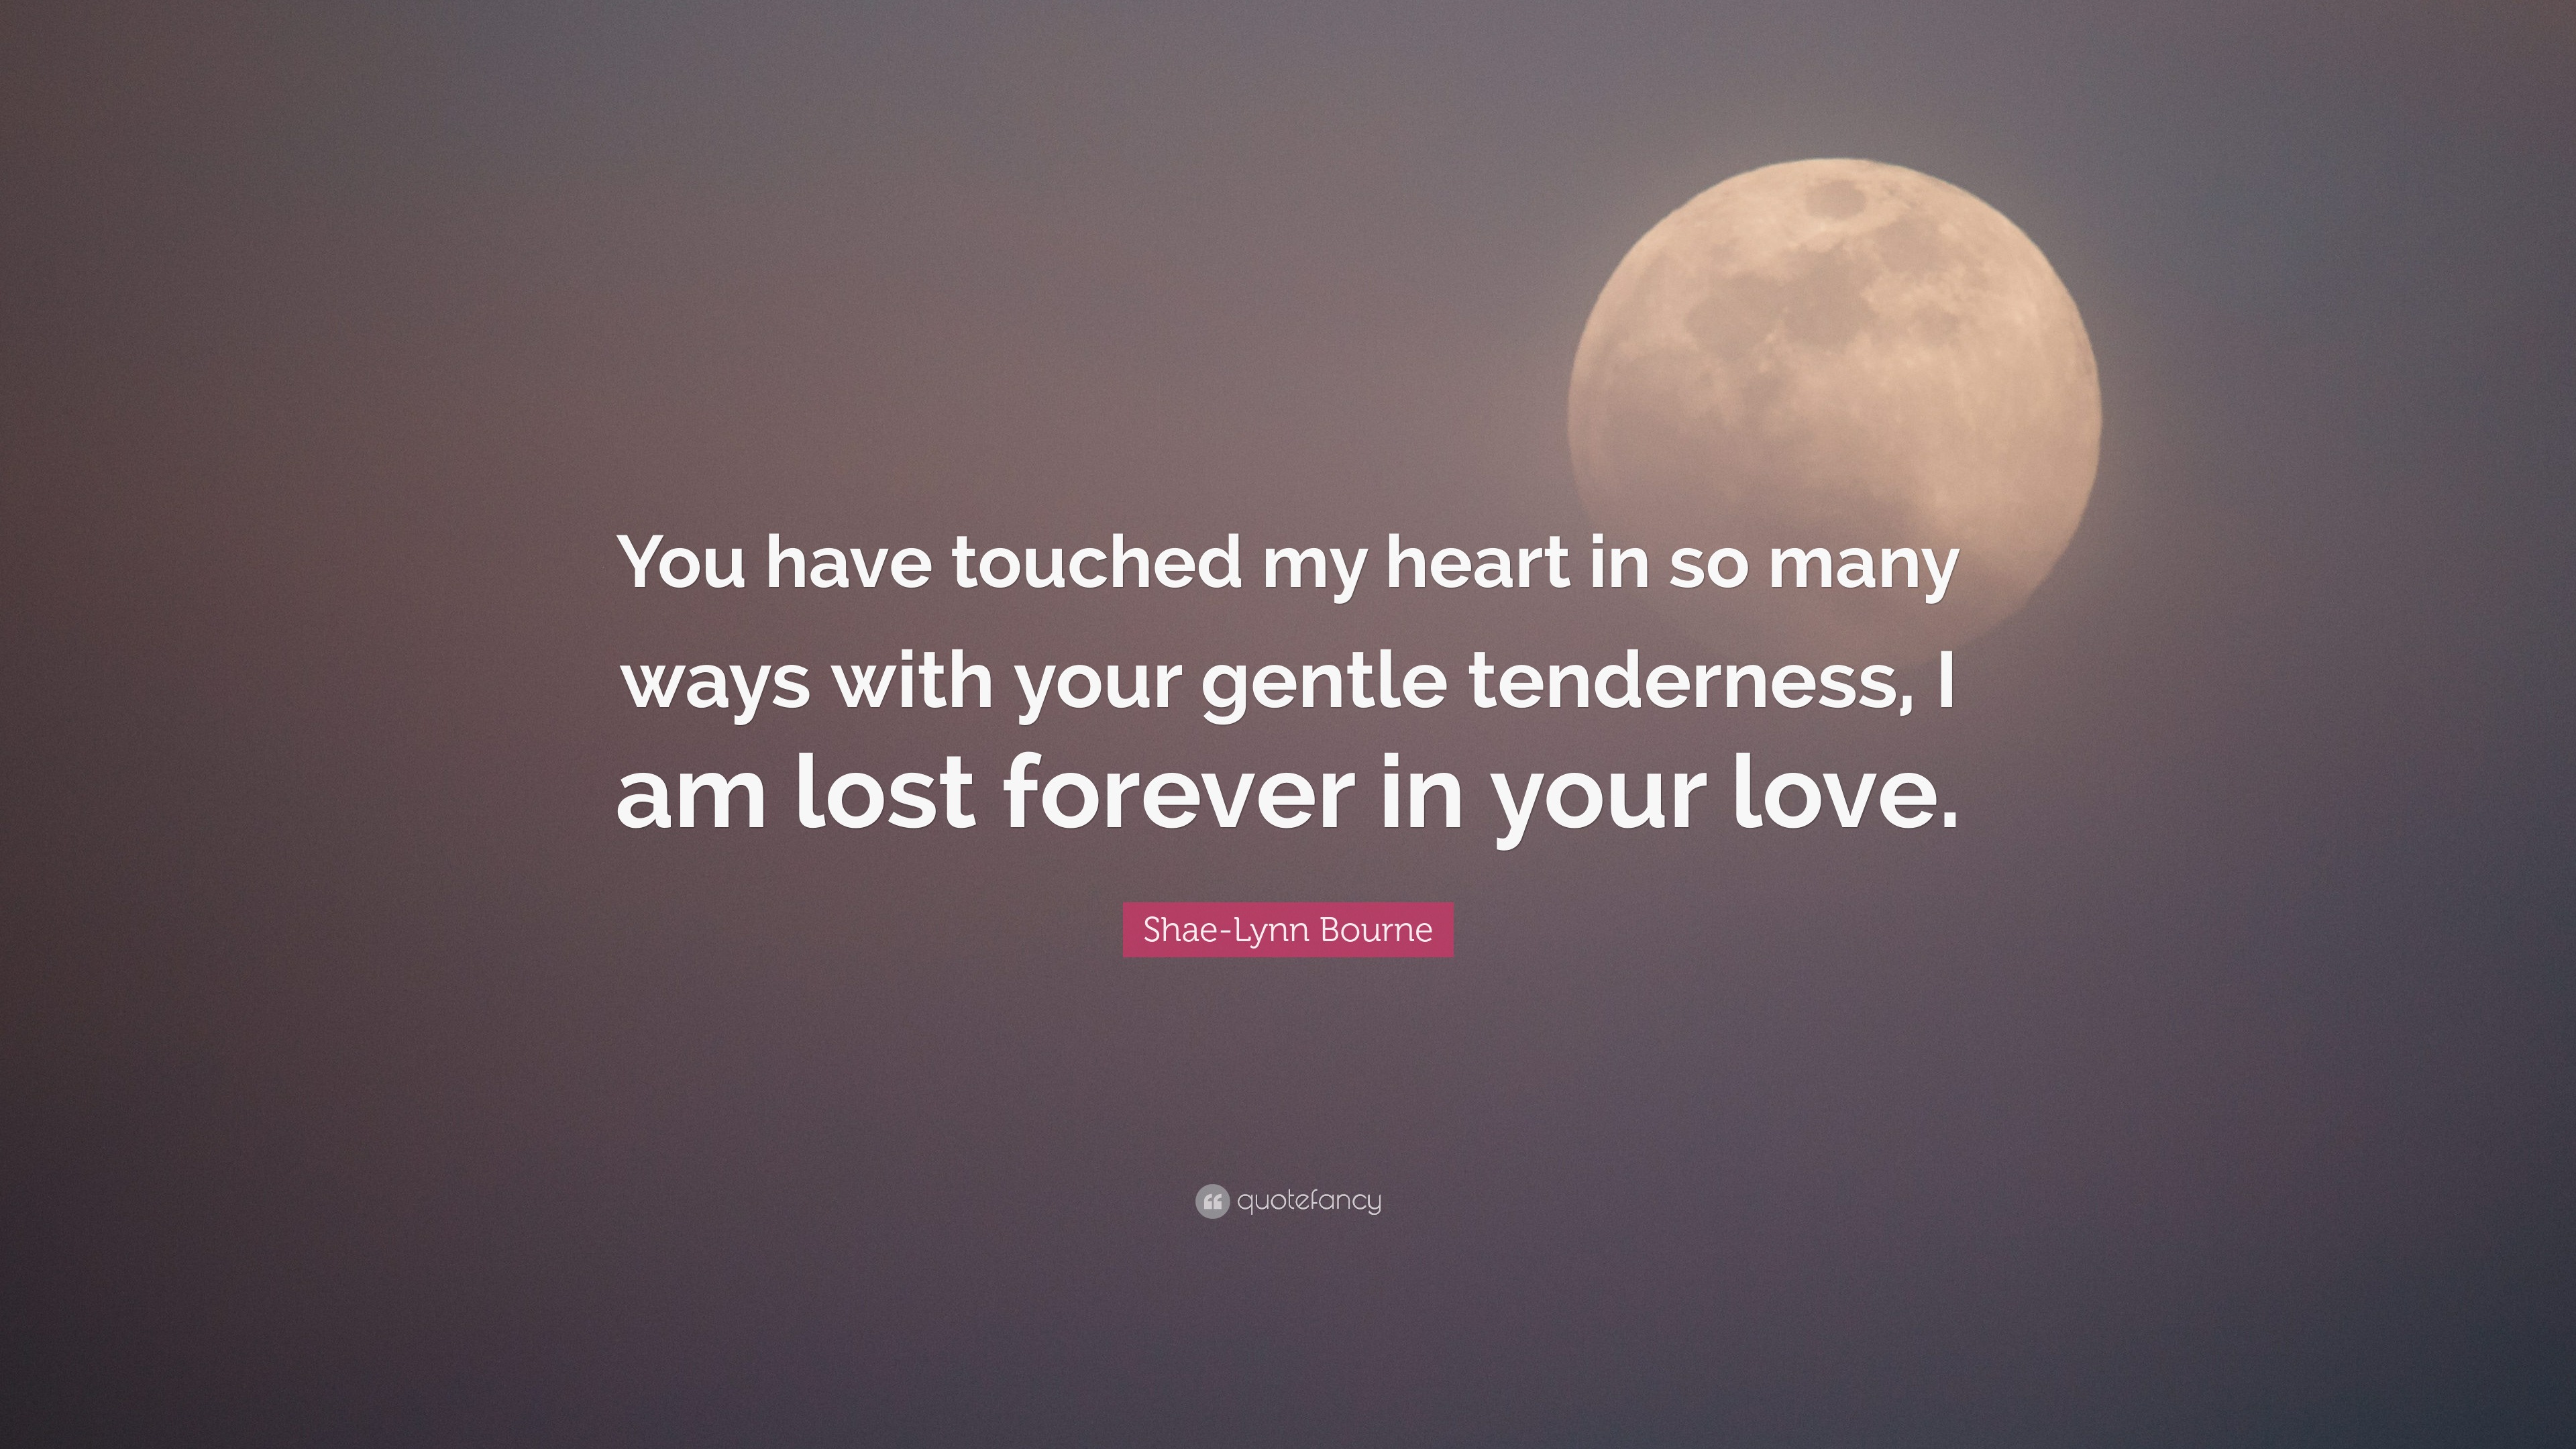 https://quotefancy.com/media/wallpaper/3840x2160/4831682-Shae-Lynn-Bourne-Quote-You-have-touched-my-heart-in-so-many-ways.jpg